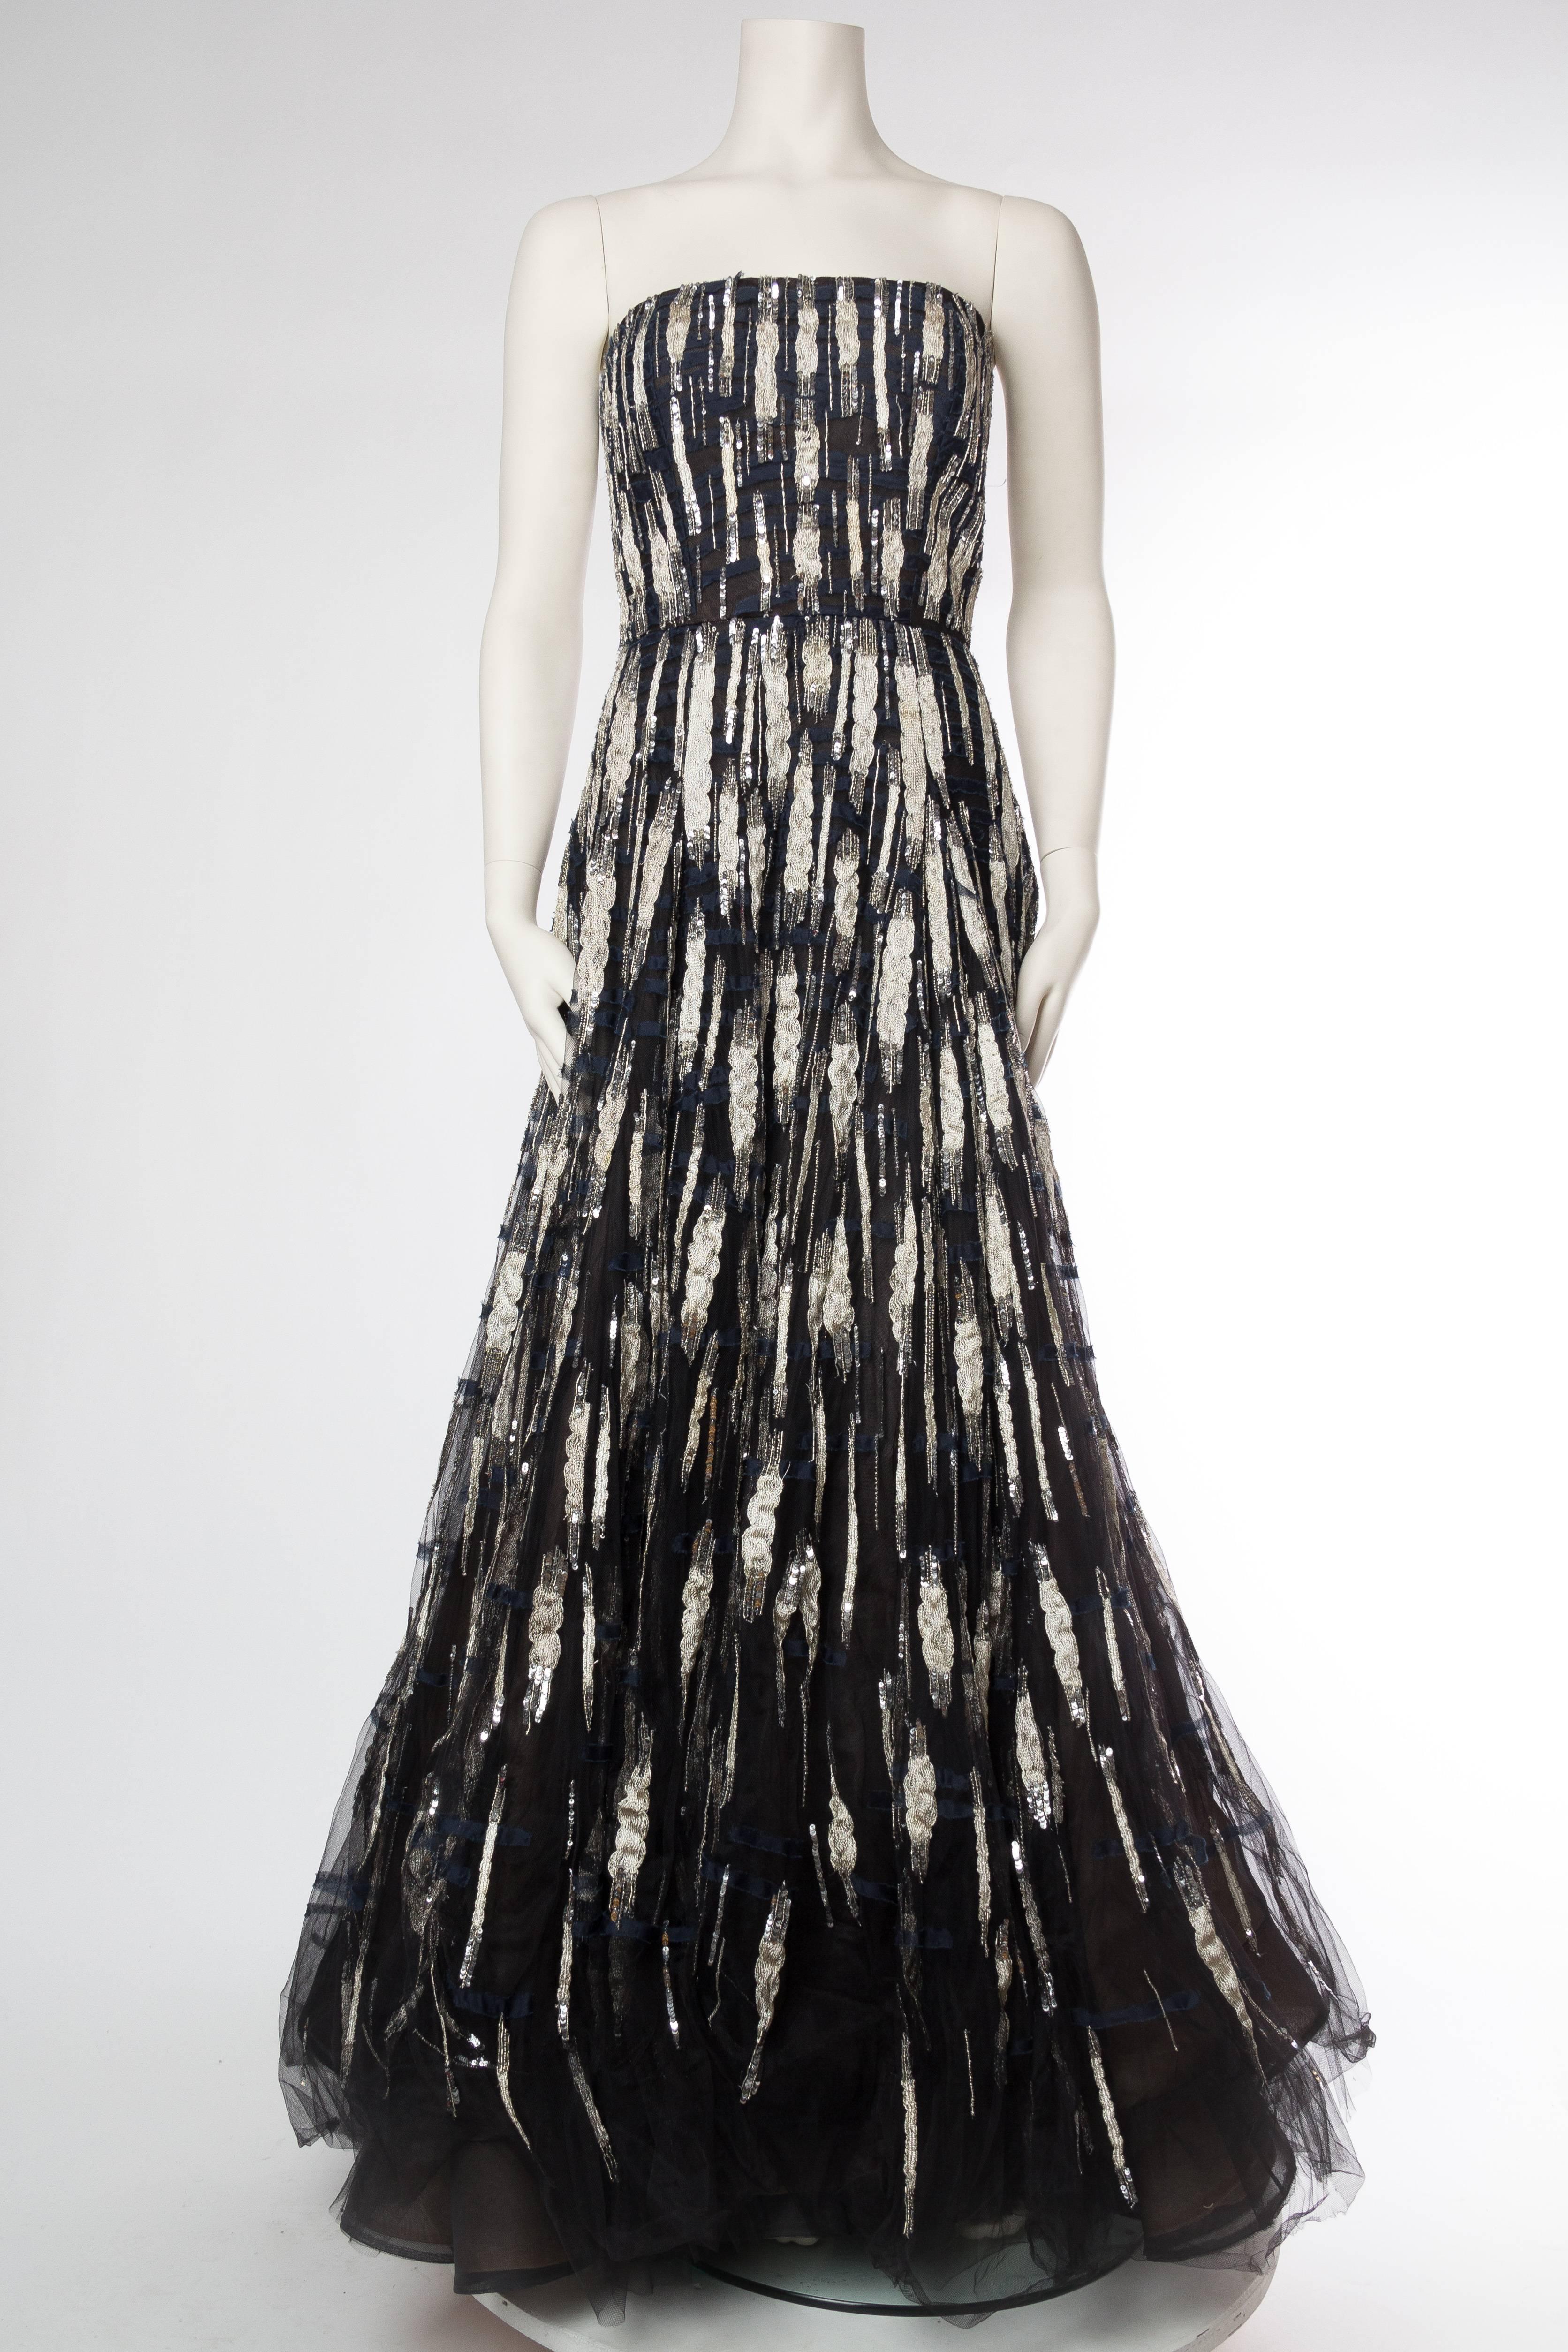 Oscar De La Renta Beaded Tulle Gown with Metallic silver and shredded chiffon appliques. Tagged size 6 but runs large. 